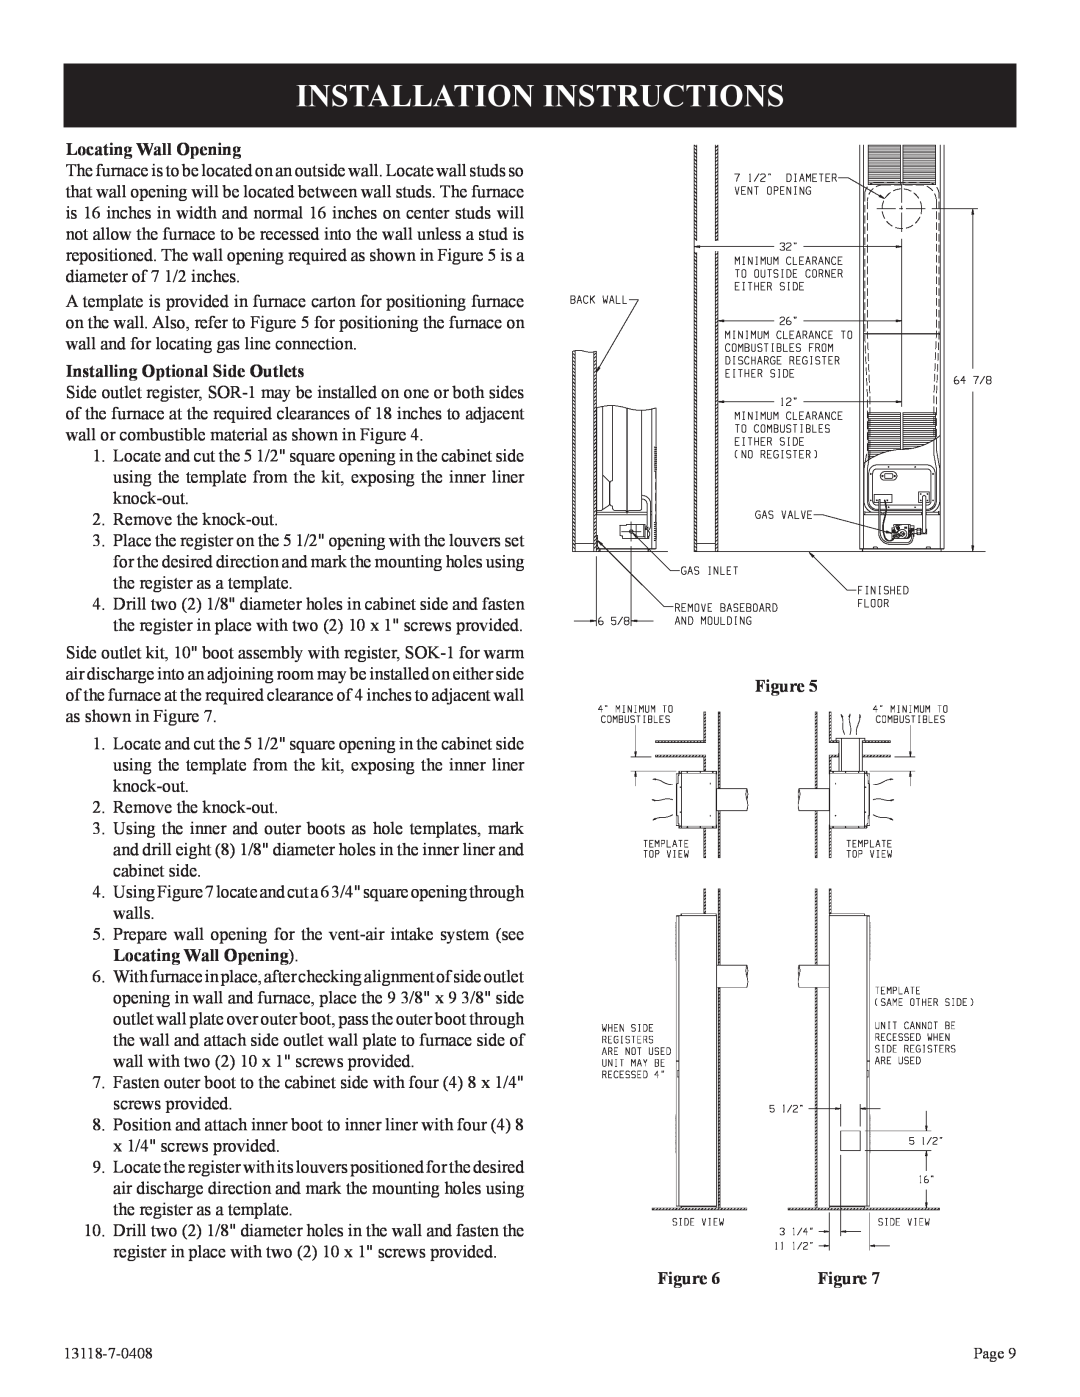 Empire Comfort Systems DV-55T-1 Installation Instructions, Locating Wall Opening, Installing Optional Side Outlets, Figure 